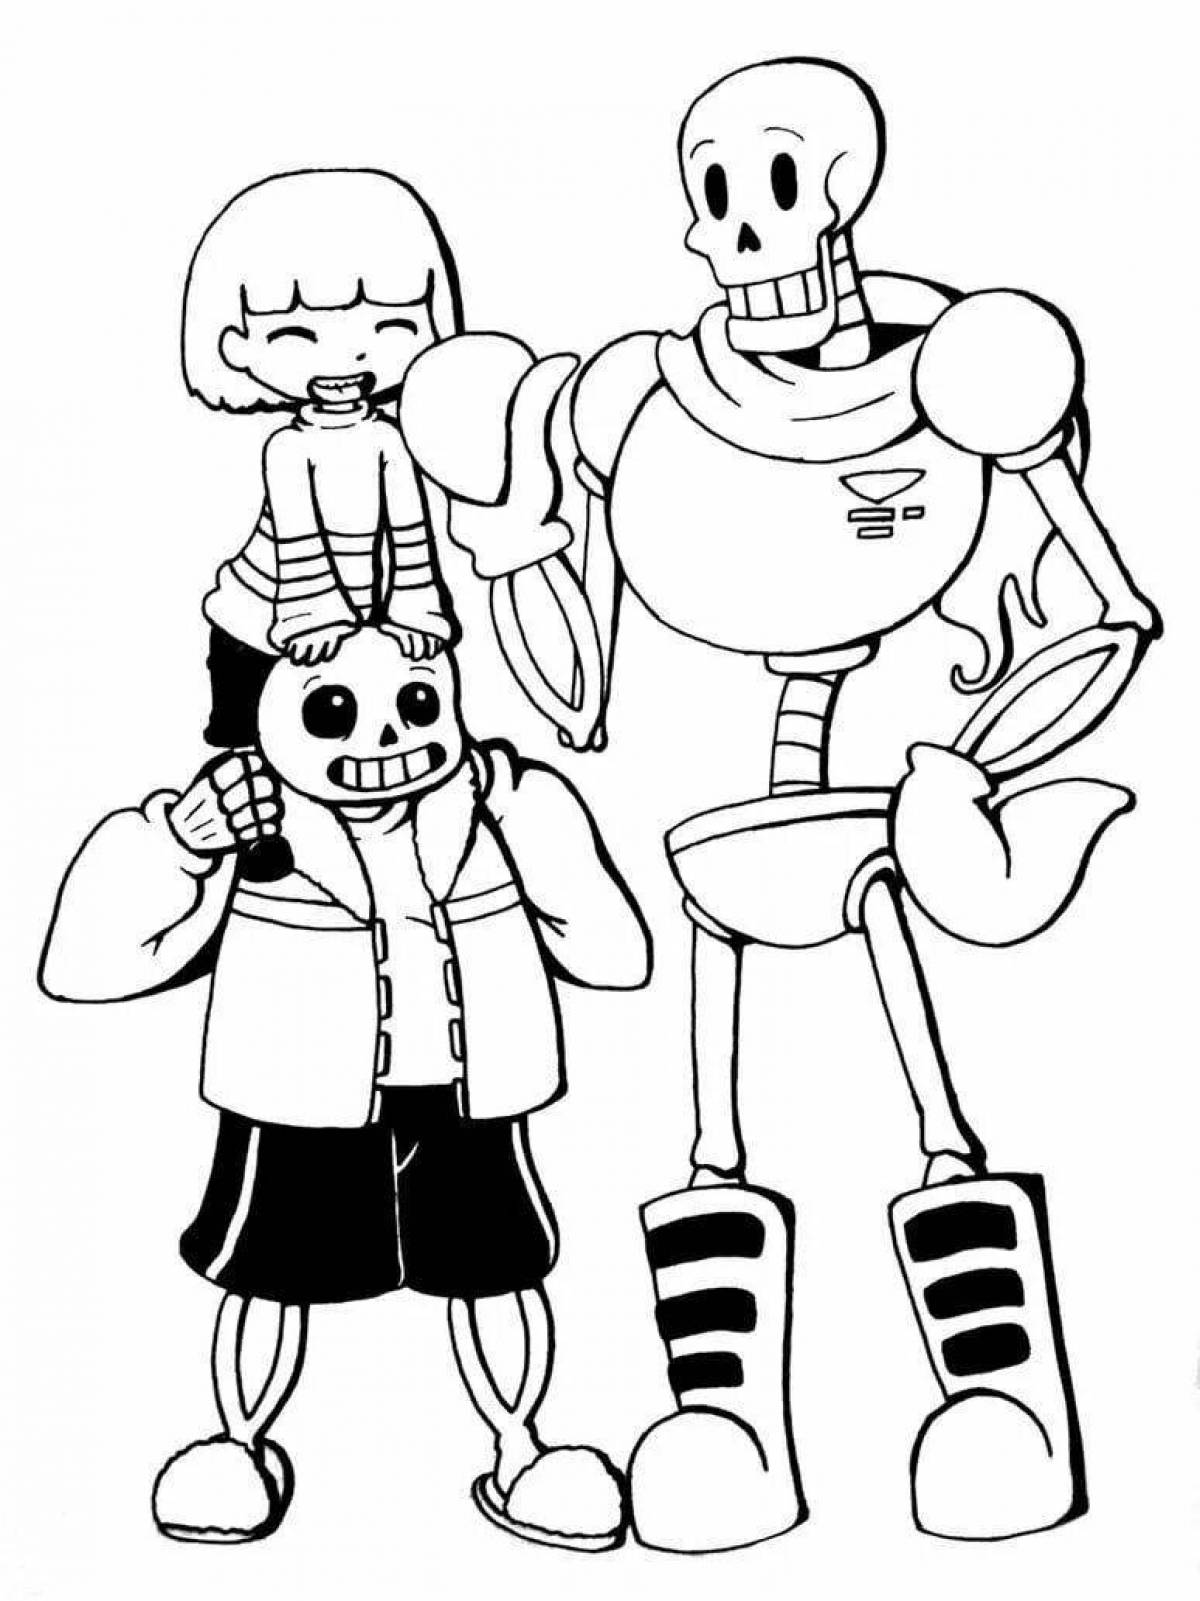 Dazzling papyrus and sans coloring book